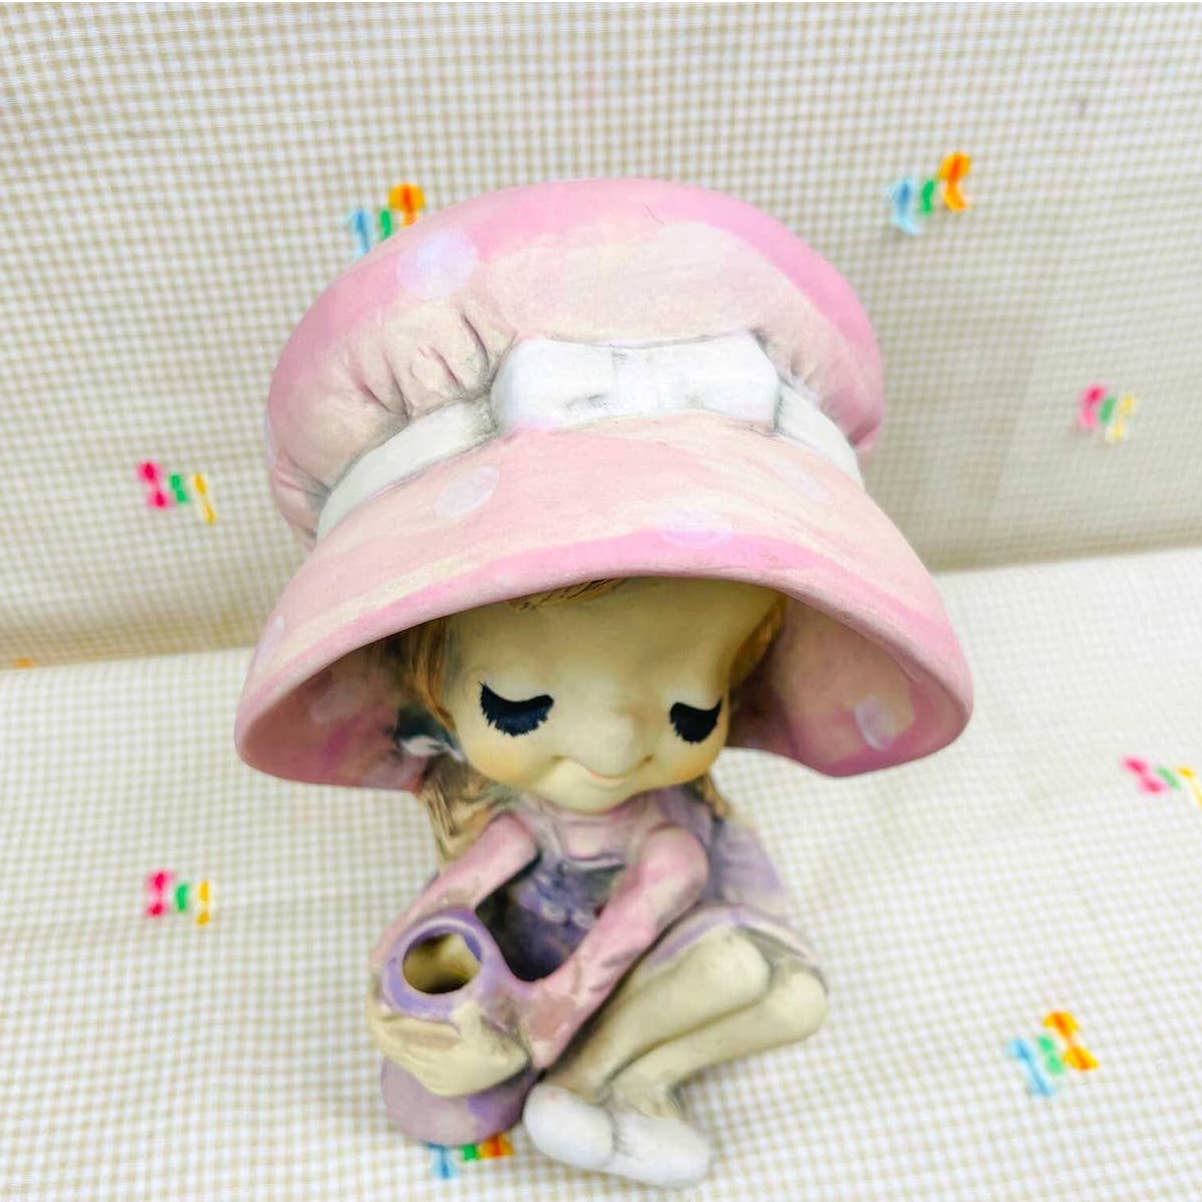 Vintage UCTCI Sitting Girl Big Hat w/Air Plant Pot 7" Ceramic Figurine Collectable kitschy Knick-Knacks 1960's mid century decor